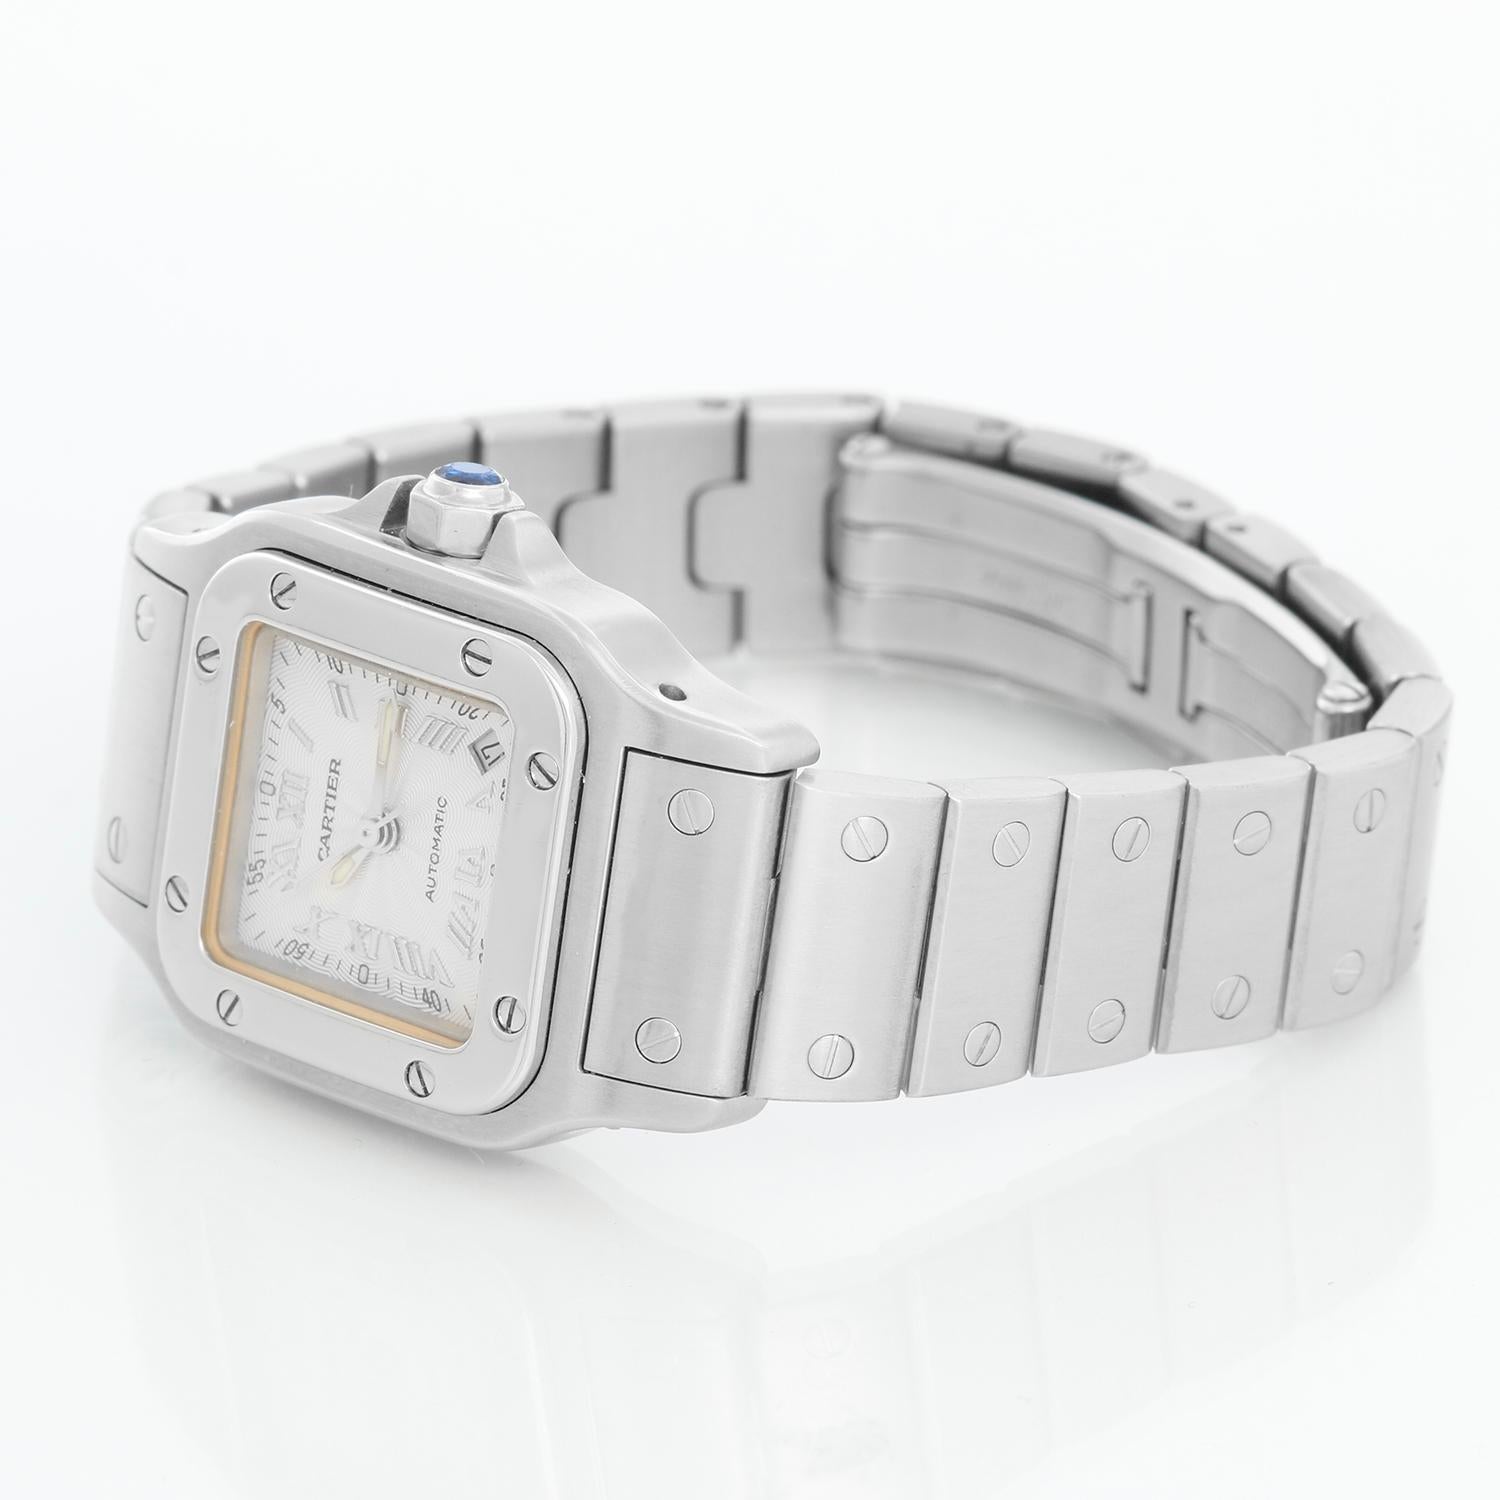 Cartier Santos Galbee Small Ladies Watch 2423 - Automatic. Stainless steel case (24mm x 35mm). White dial with steel Roman numerals; date between 3 & 4 o'clock. Stainless steel Santos bracelet. Pre-owned with custom box.